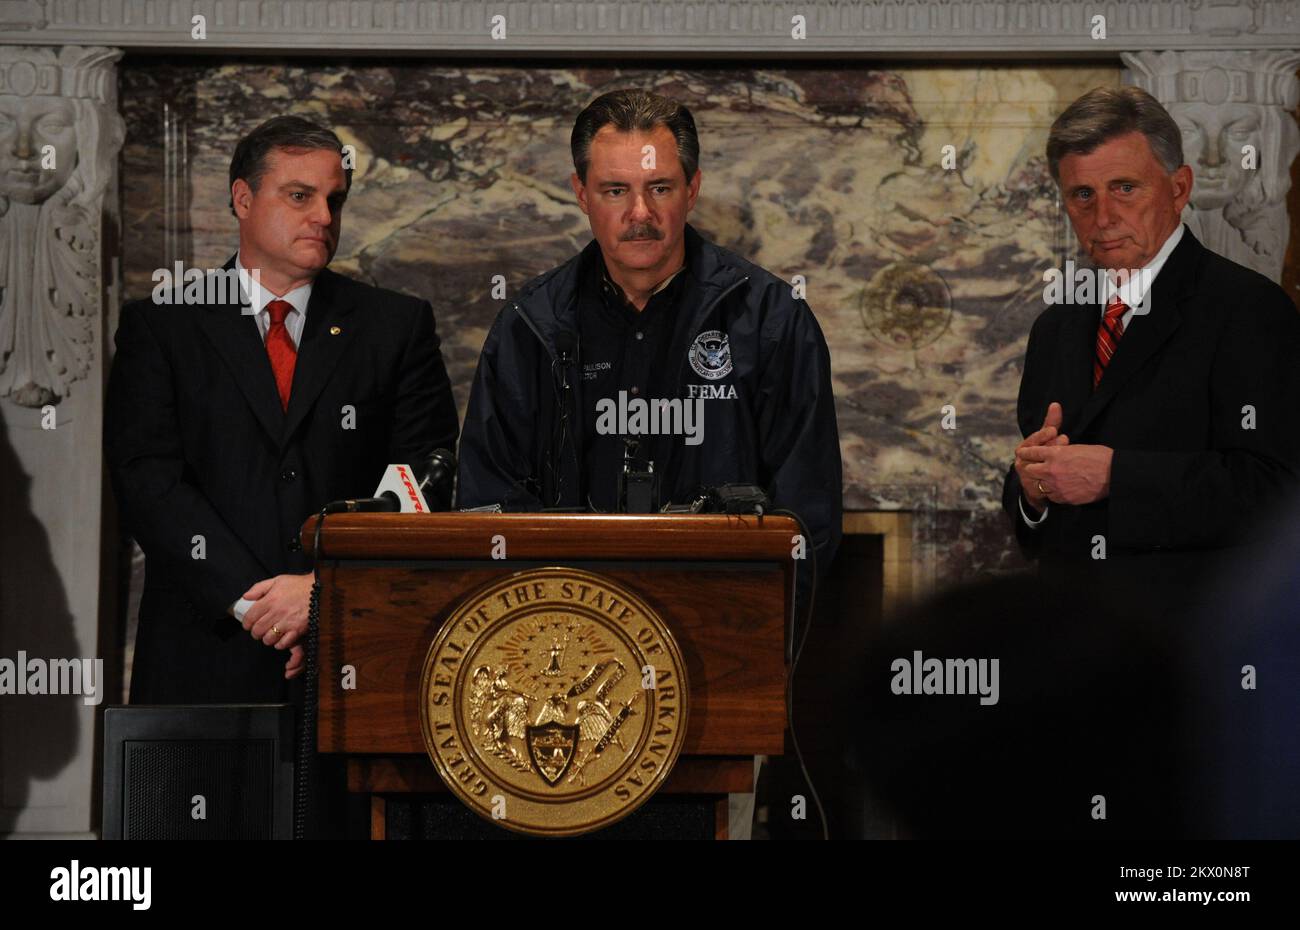 Severe Storms, Tornadoes, and Flooding,  LIttle Rock, AR, March 31, 2008   FEMA Administrator David Paulison, center, responds to reporters at a press conference with Arkansas Governor Mike Beebe, right, and Senator Pryor, left at the Arkansas State House. LIttle Rock, AR-FEMA Admistrator Dave Paulison, center responds to reporters at a press conference  with Arkansas Governor Mike Beebe, right, and Senator Pryor, left  at the State House.. Photographs Relating to Disasters and Emergency Management Programs, Activities, and Officials Stock Photo